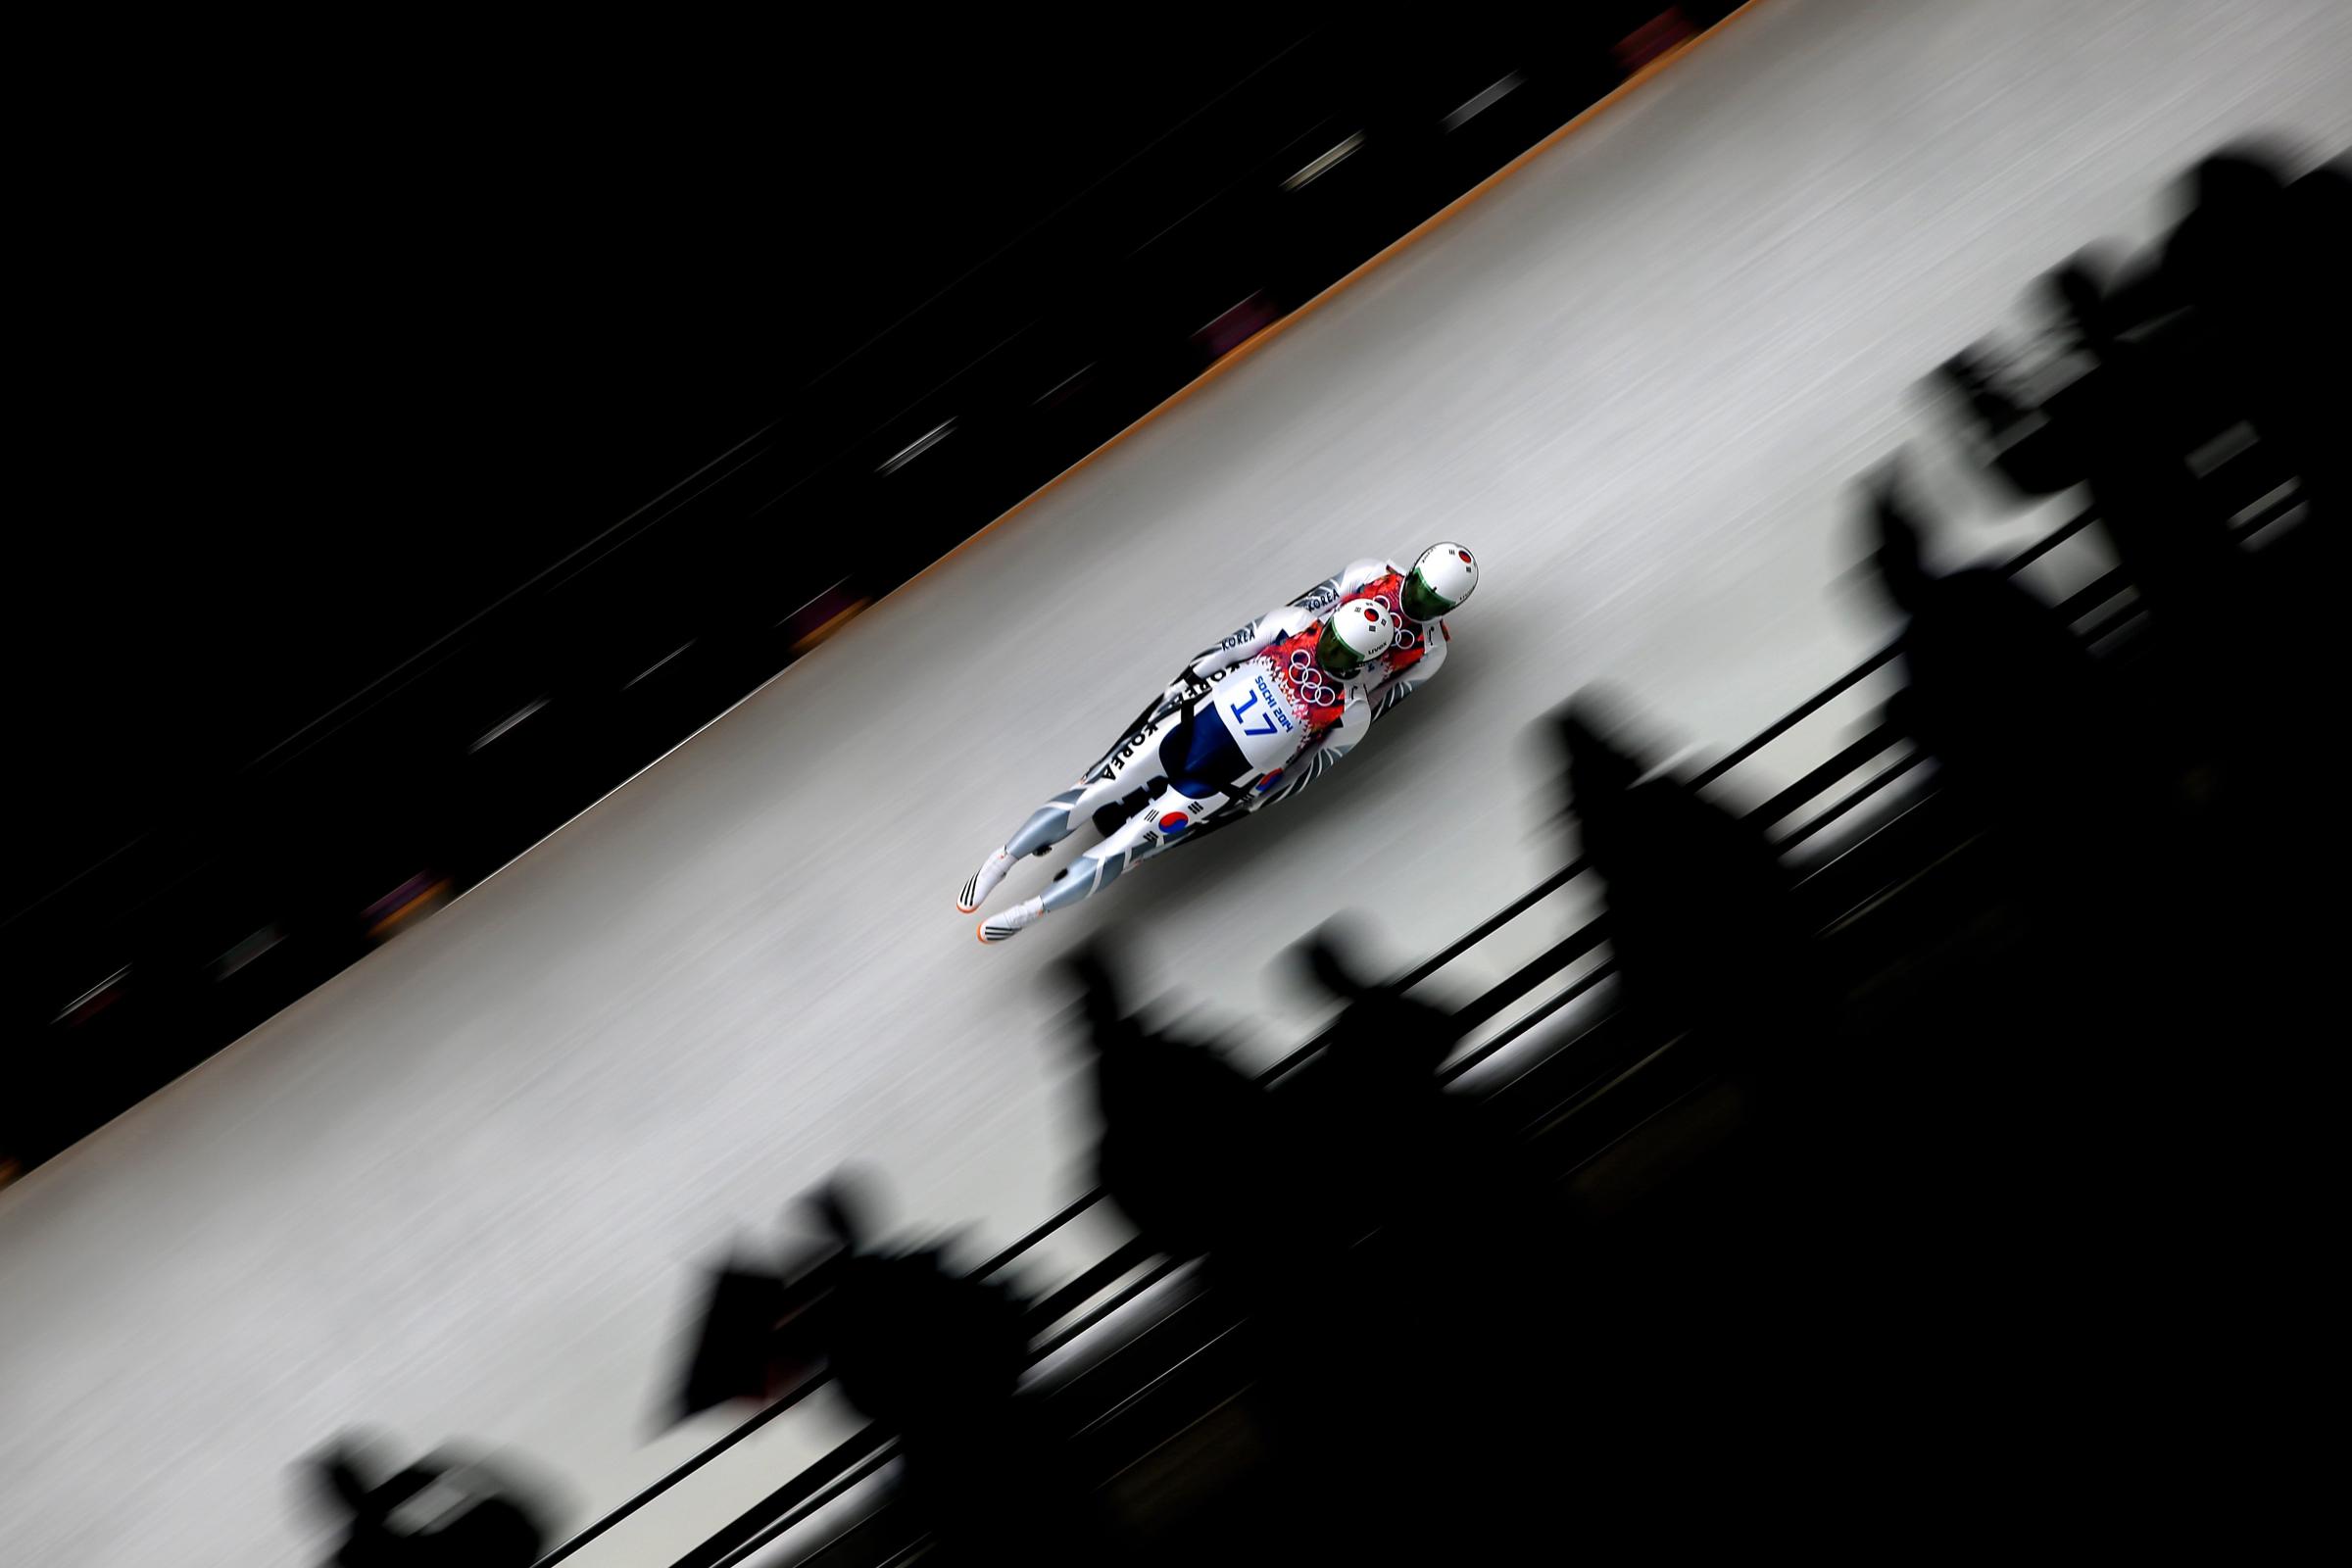 Jinyong Park and Jung Myung Cho of Korea compete in the Men's Luge Doubles at Sliding Center Sanki on Feb. 12, 2014 in Sochi, Russia.